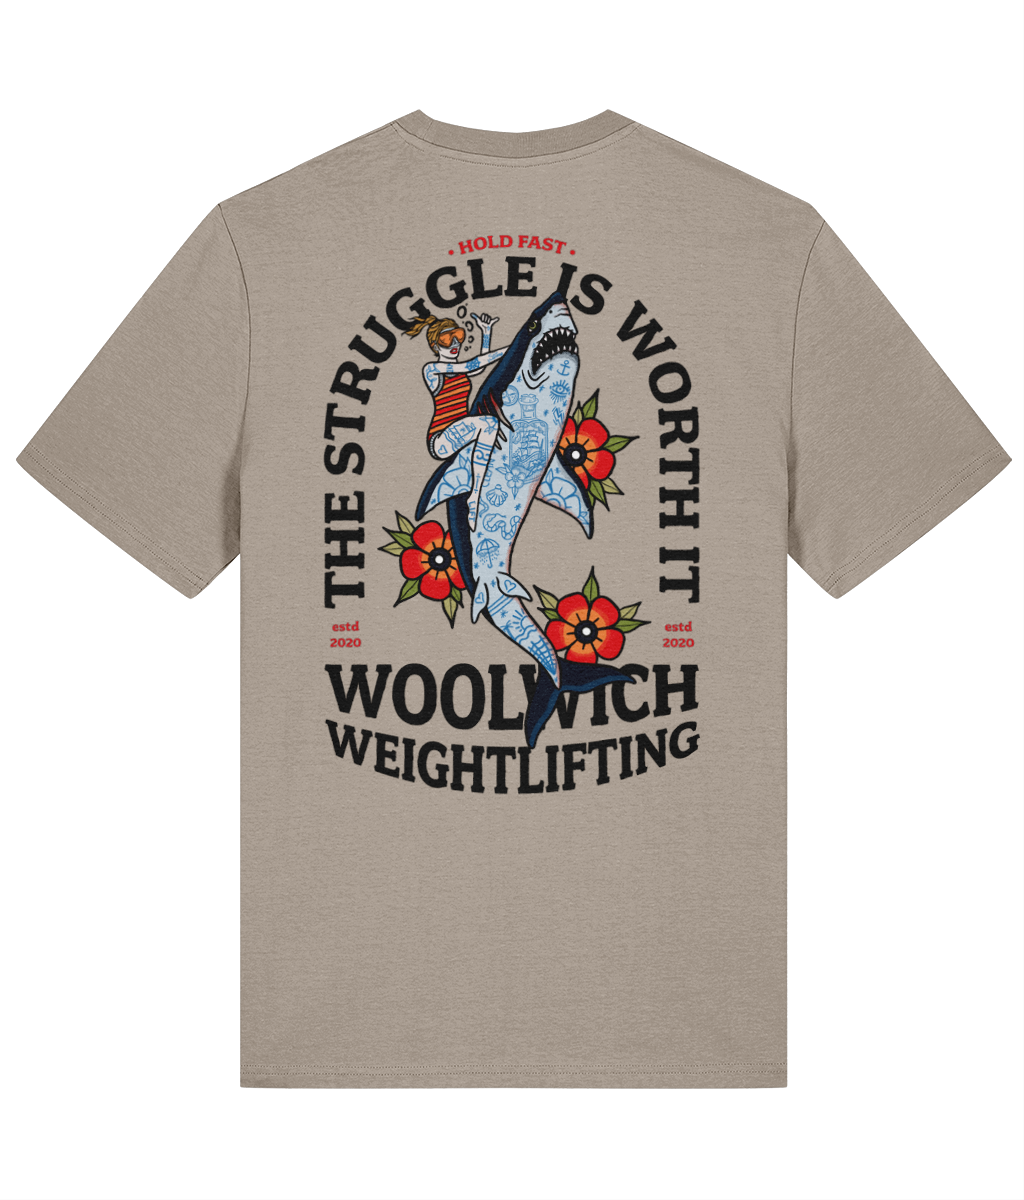 The struggle t-shirt - Woolwich Weightlifting